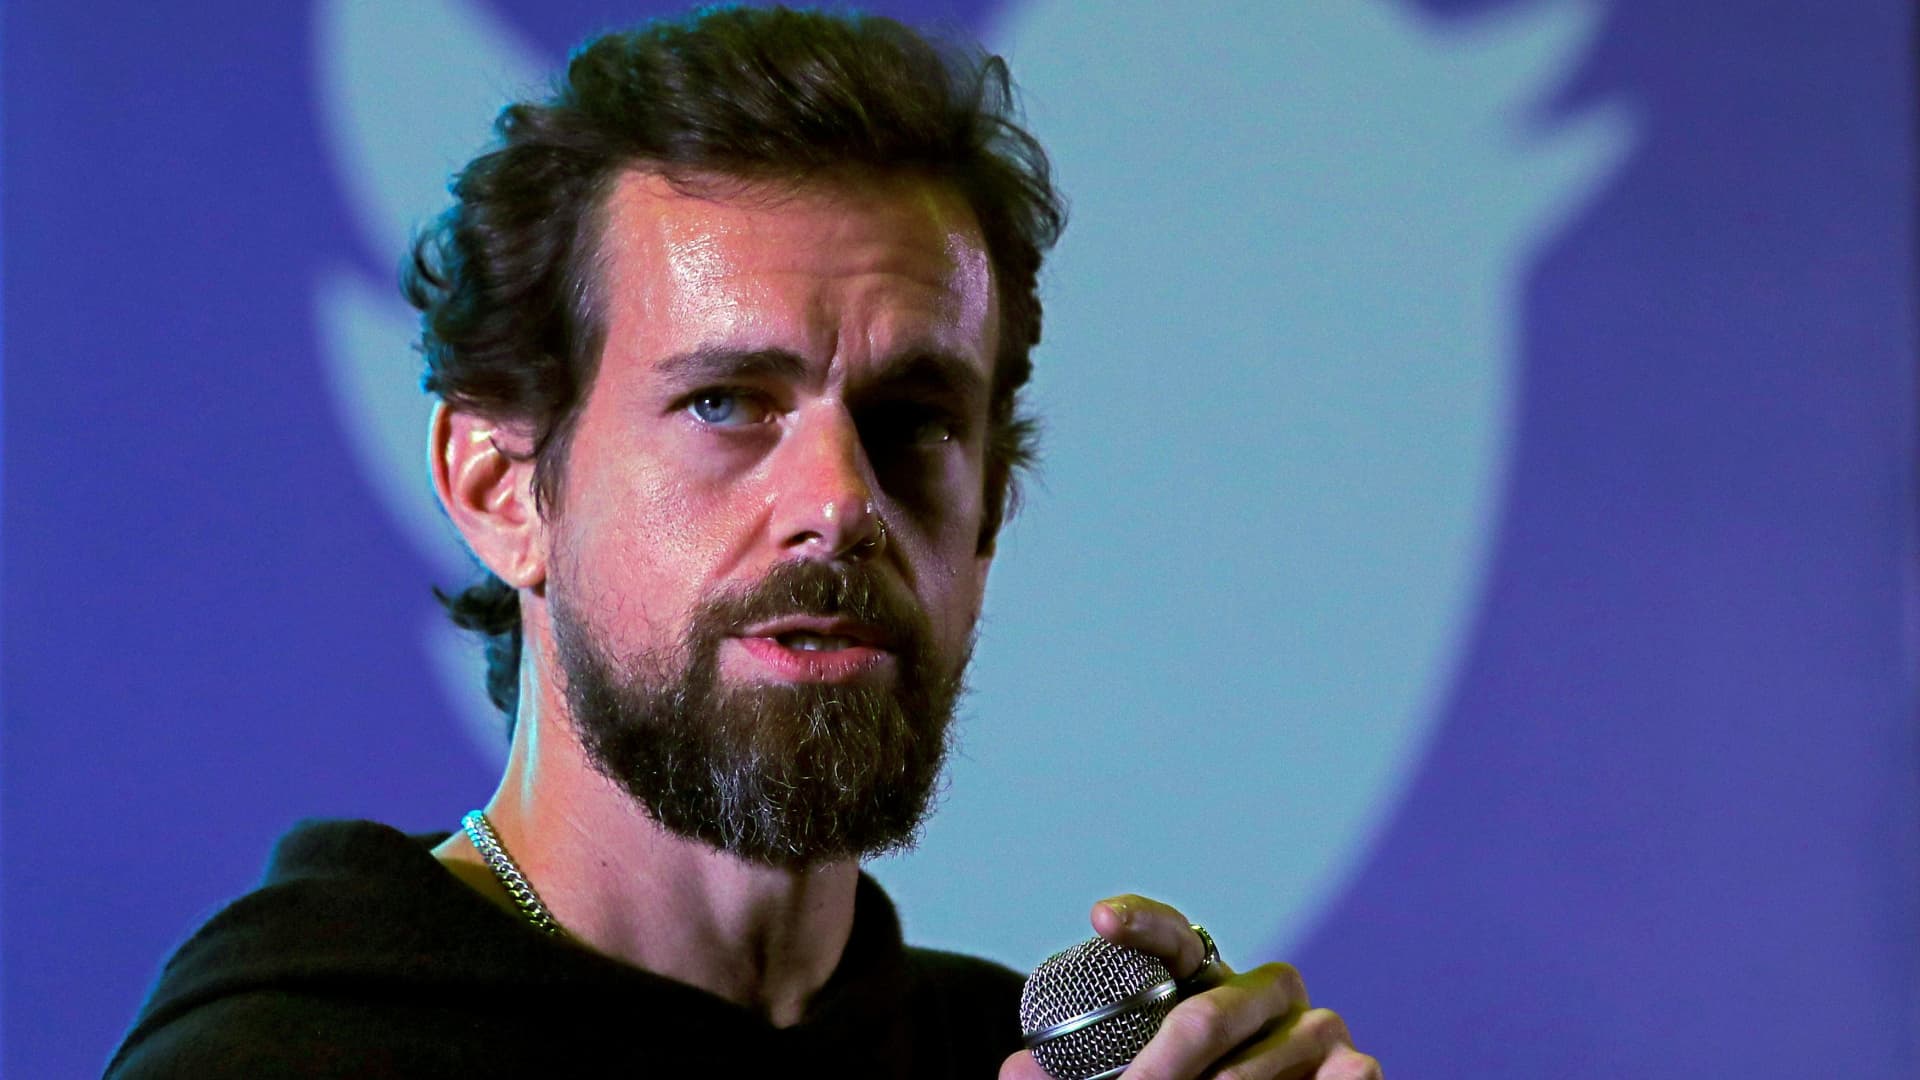 twitter-co-founder-dorsey-apologizes-for-growing-the-company-‘too-quickly’-in-wake-of-mass-layoffs